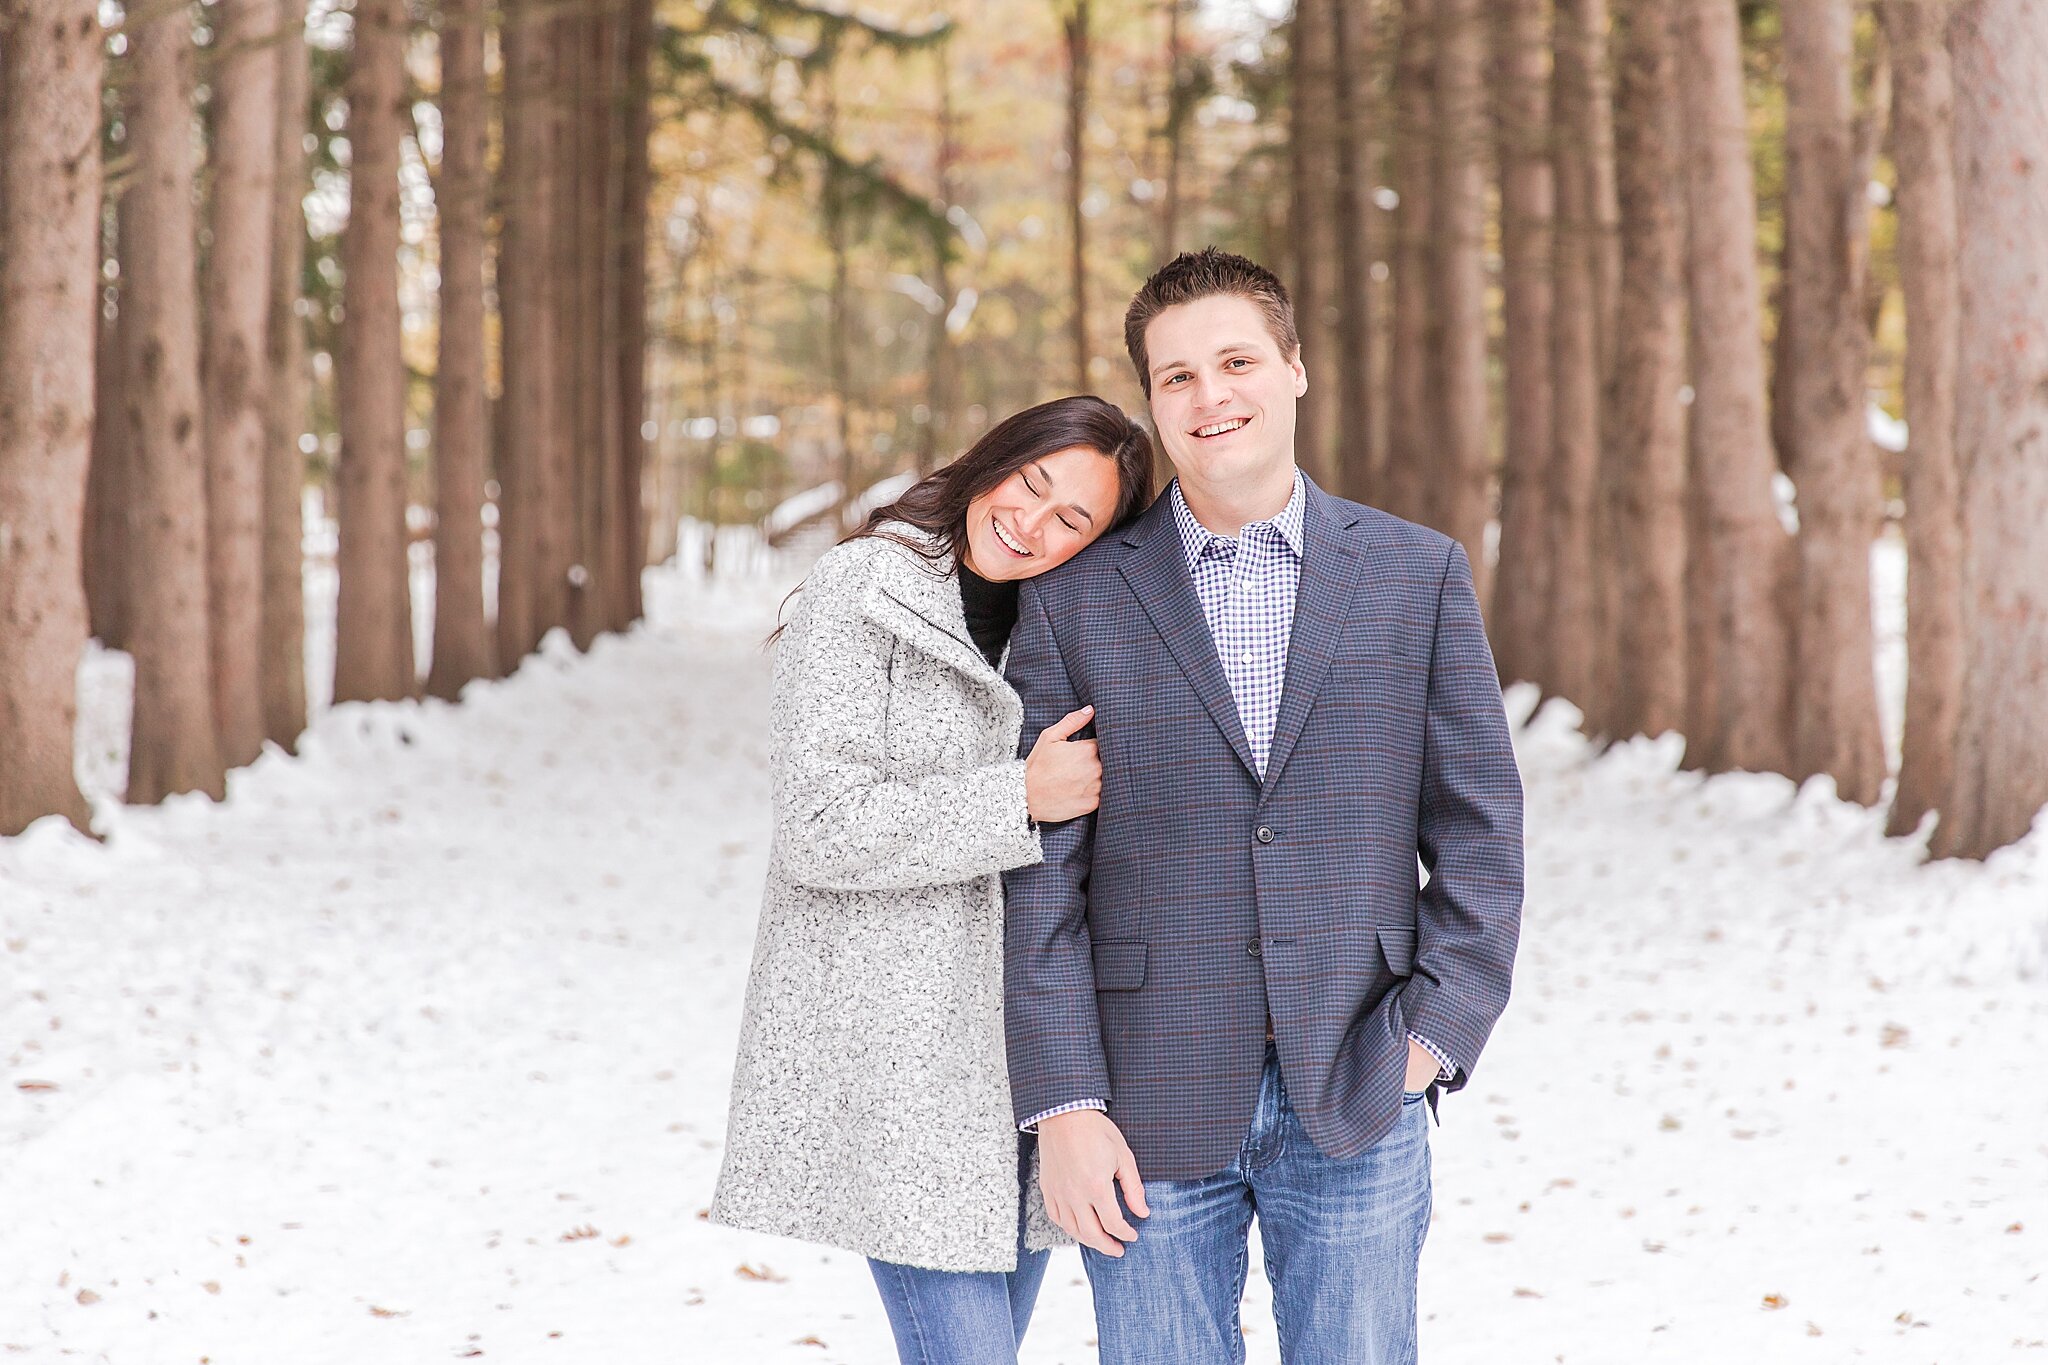 detroit-wedding-photographer-winter-engagement-photos-at-stony-creek-metropark-in-shelby-twp-mi-by-courtney-carolyn-photography_0008.jpg